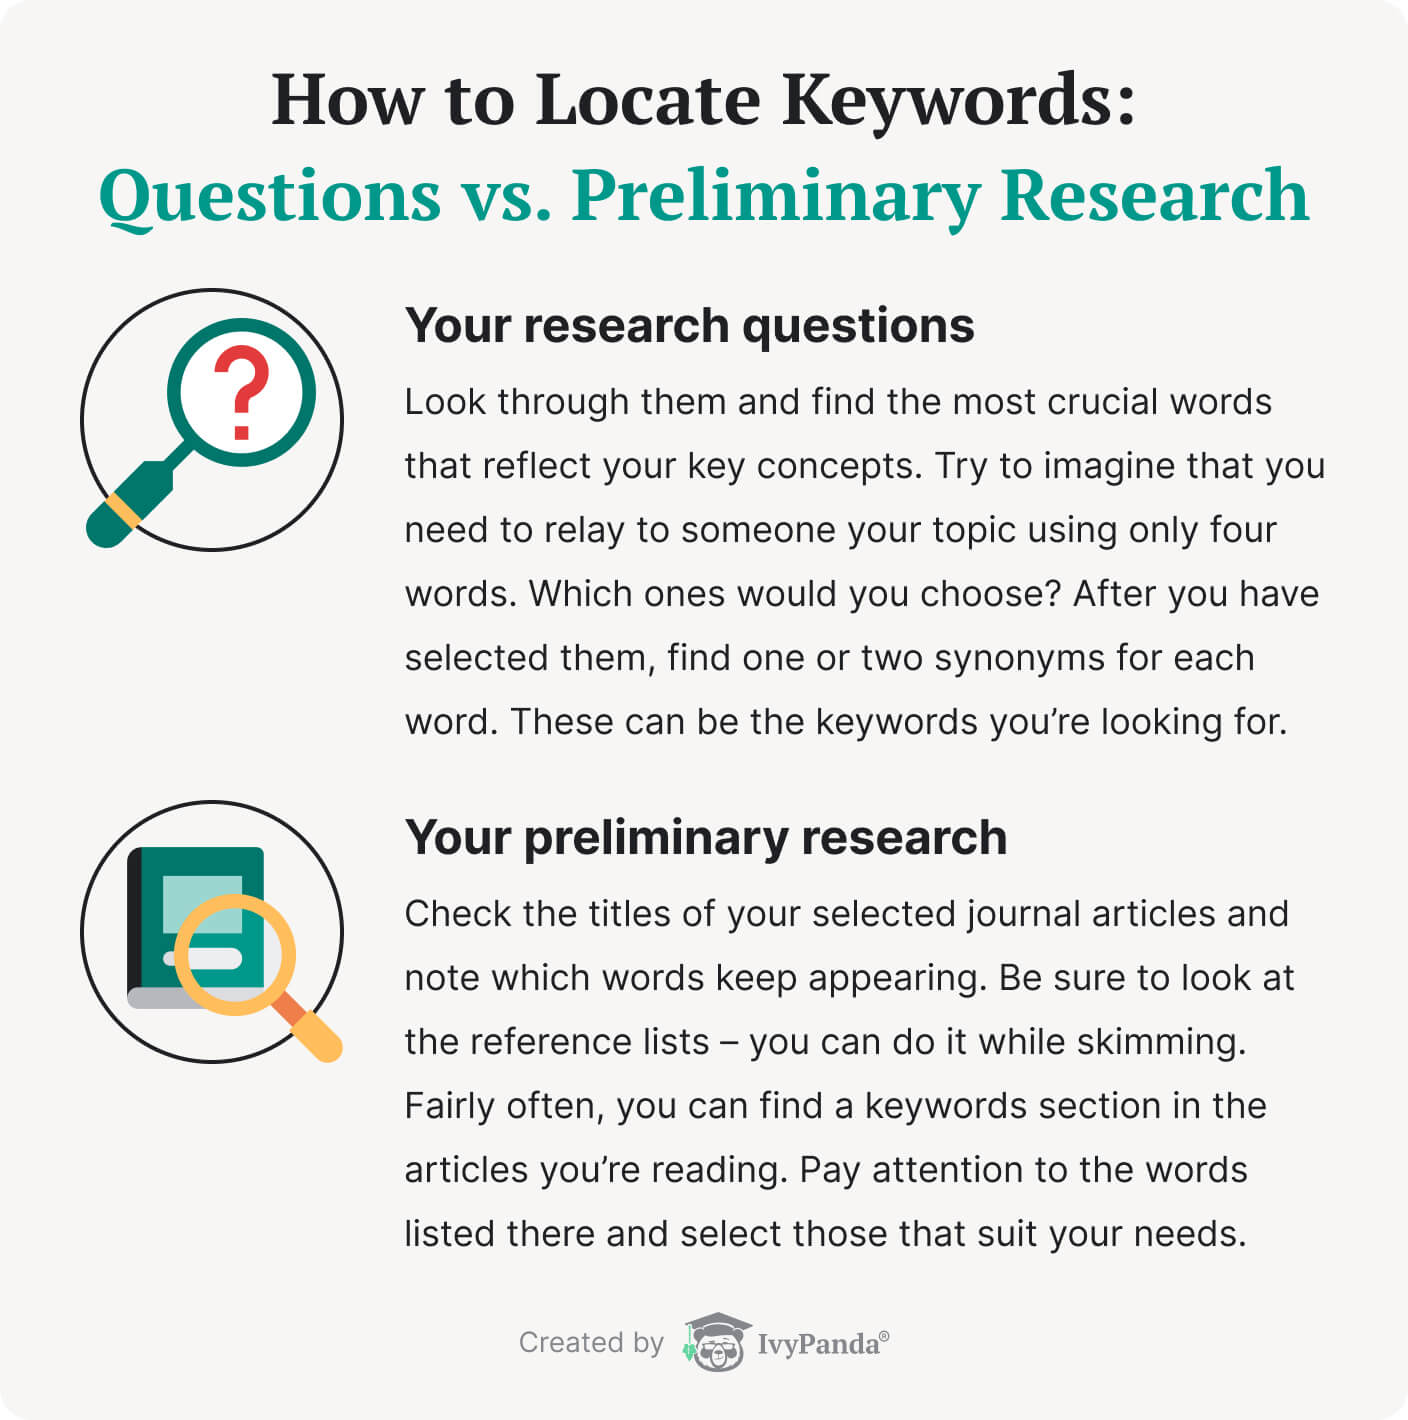 How to locate keywords for research.